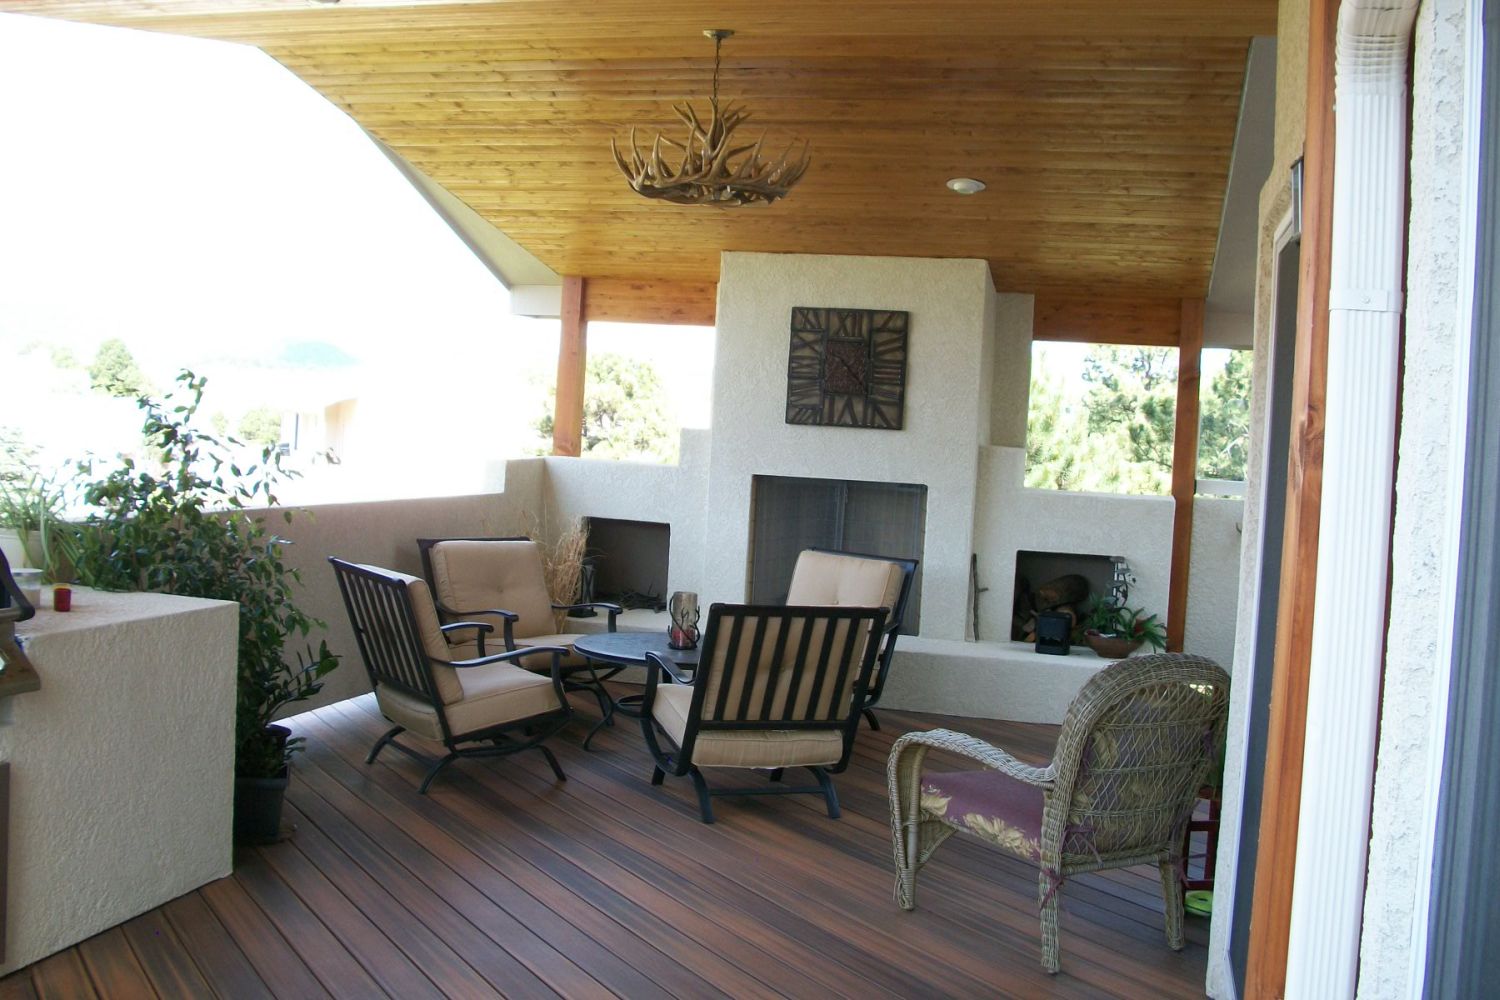 Covered, composite deck with a custom designed and built stucco, wood-burning fireplace.